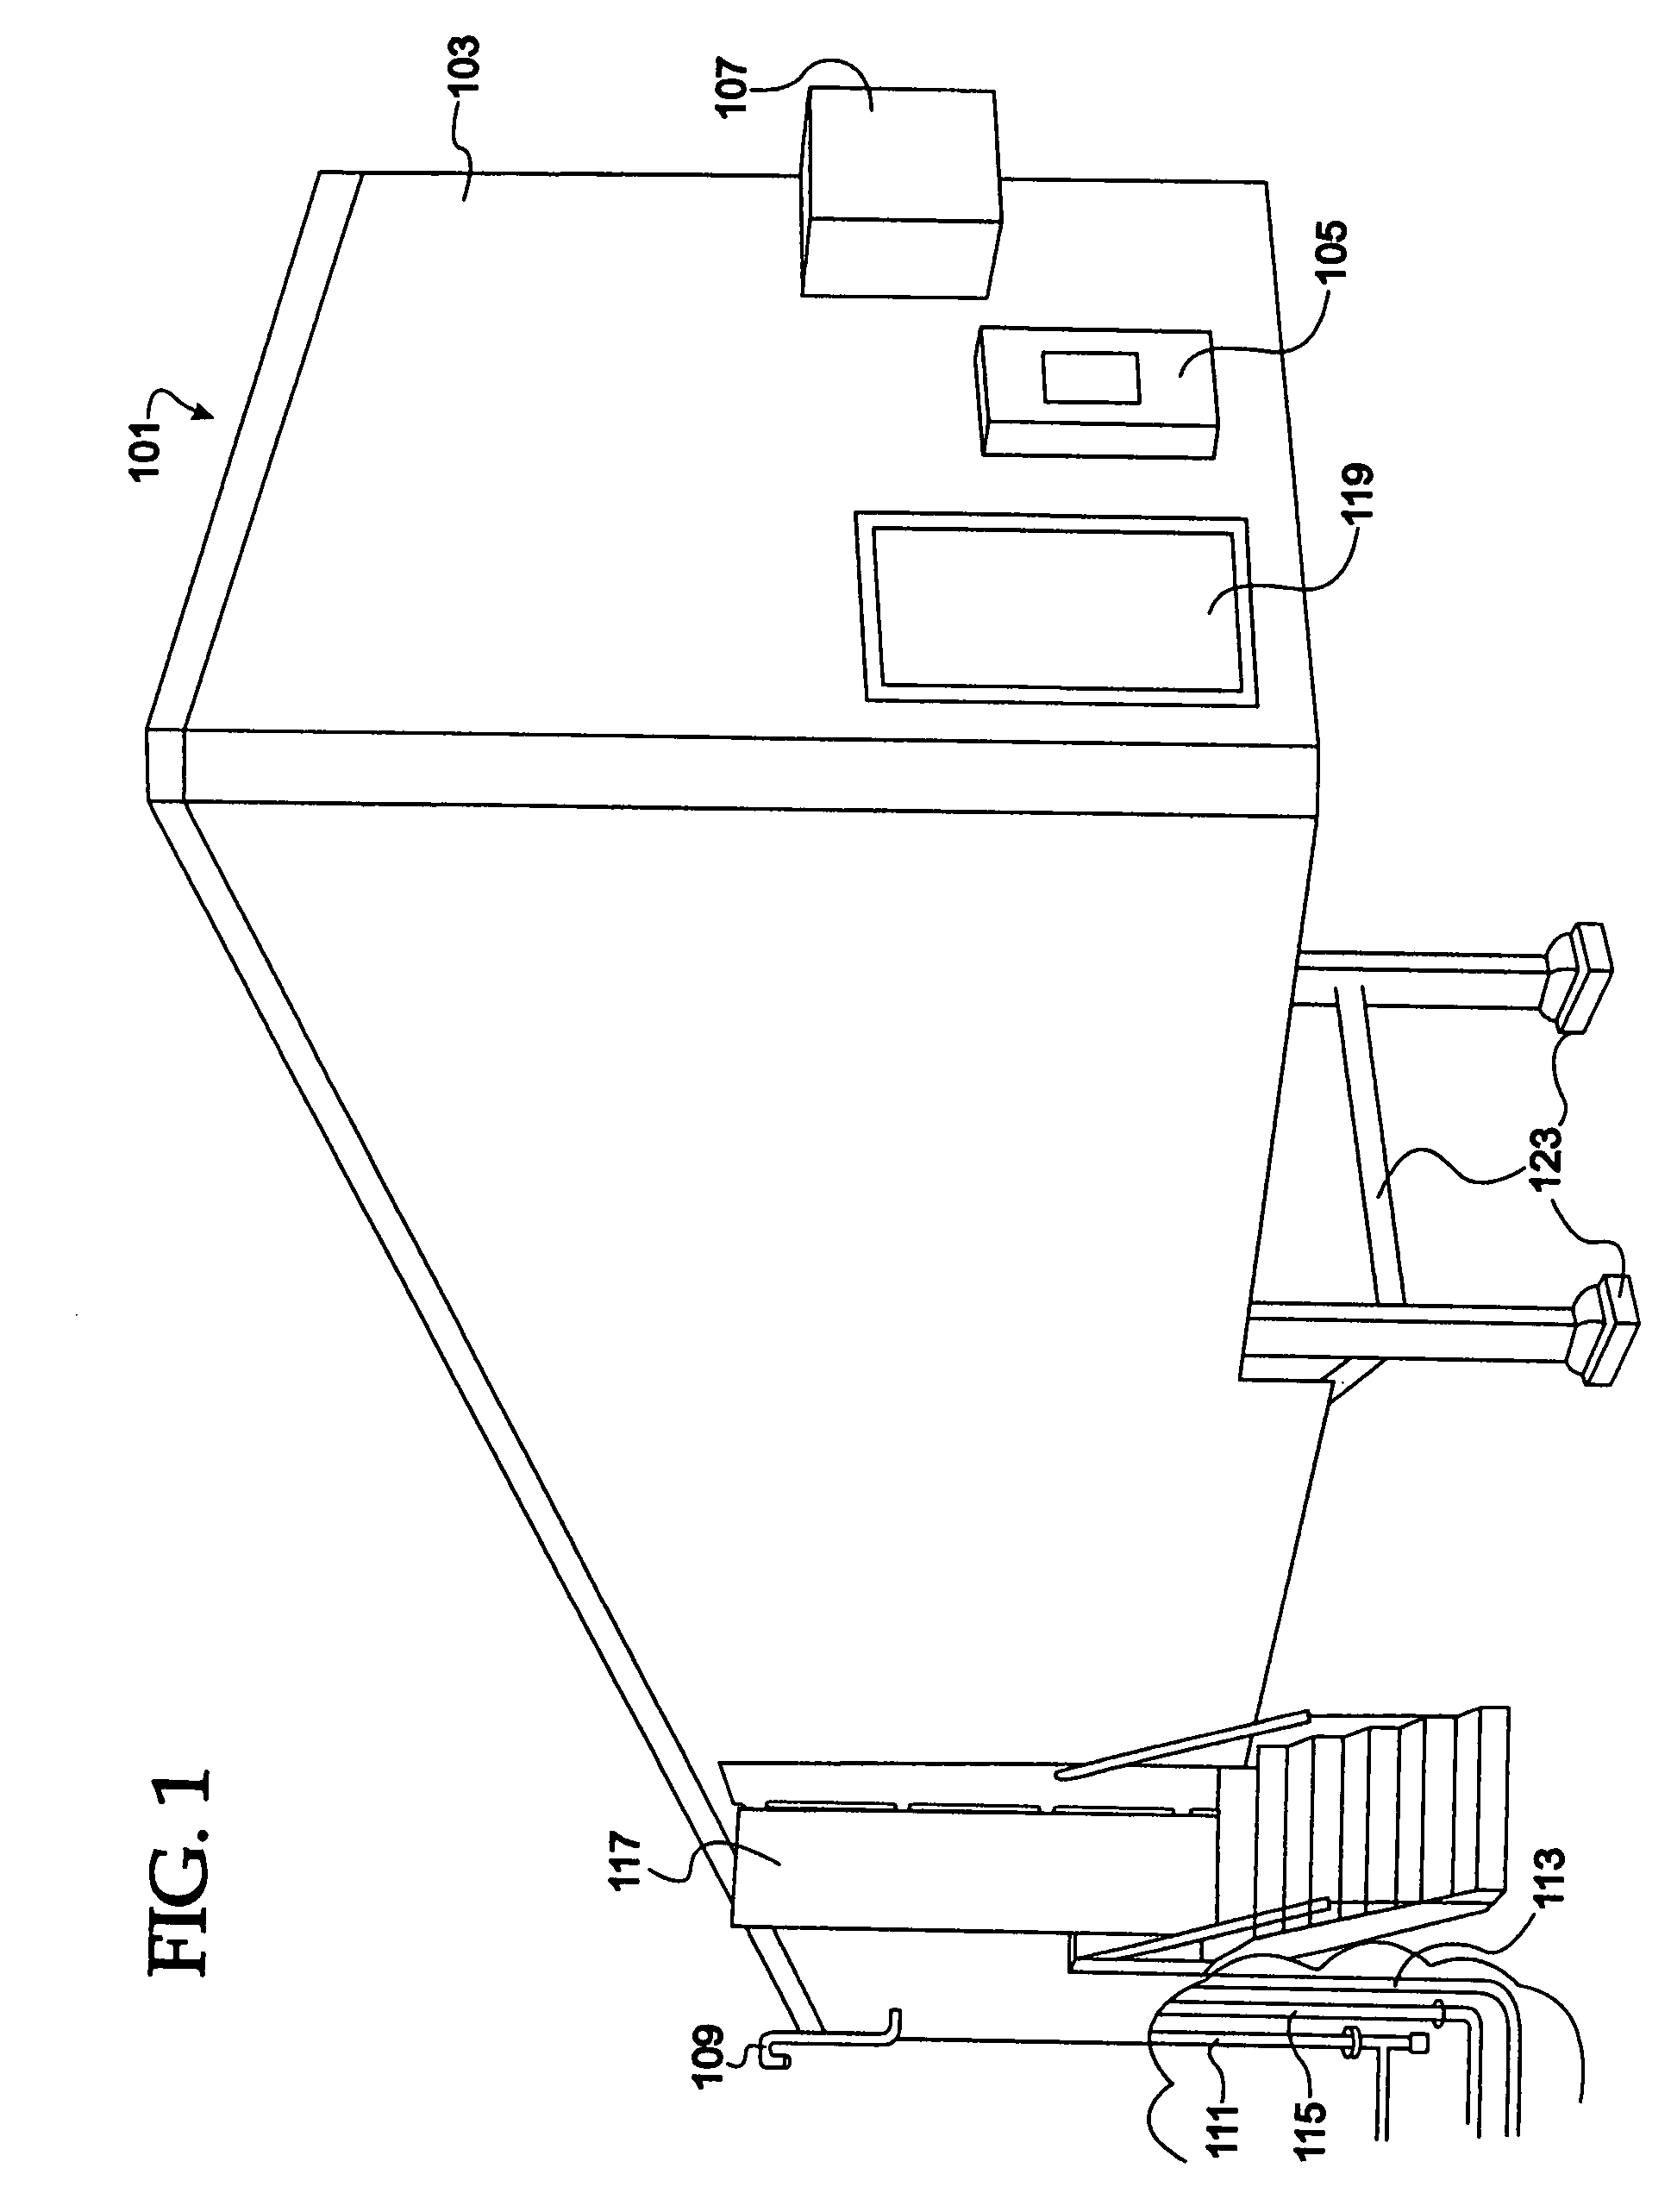 Mobile station and methods for diagnosing and modeling site specific effluent treatment facility requirements